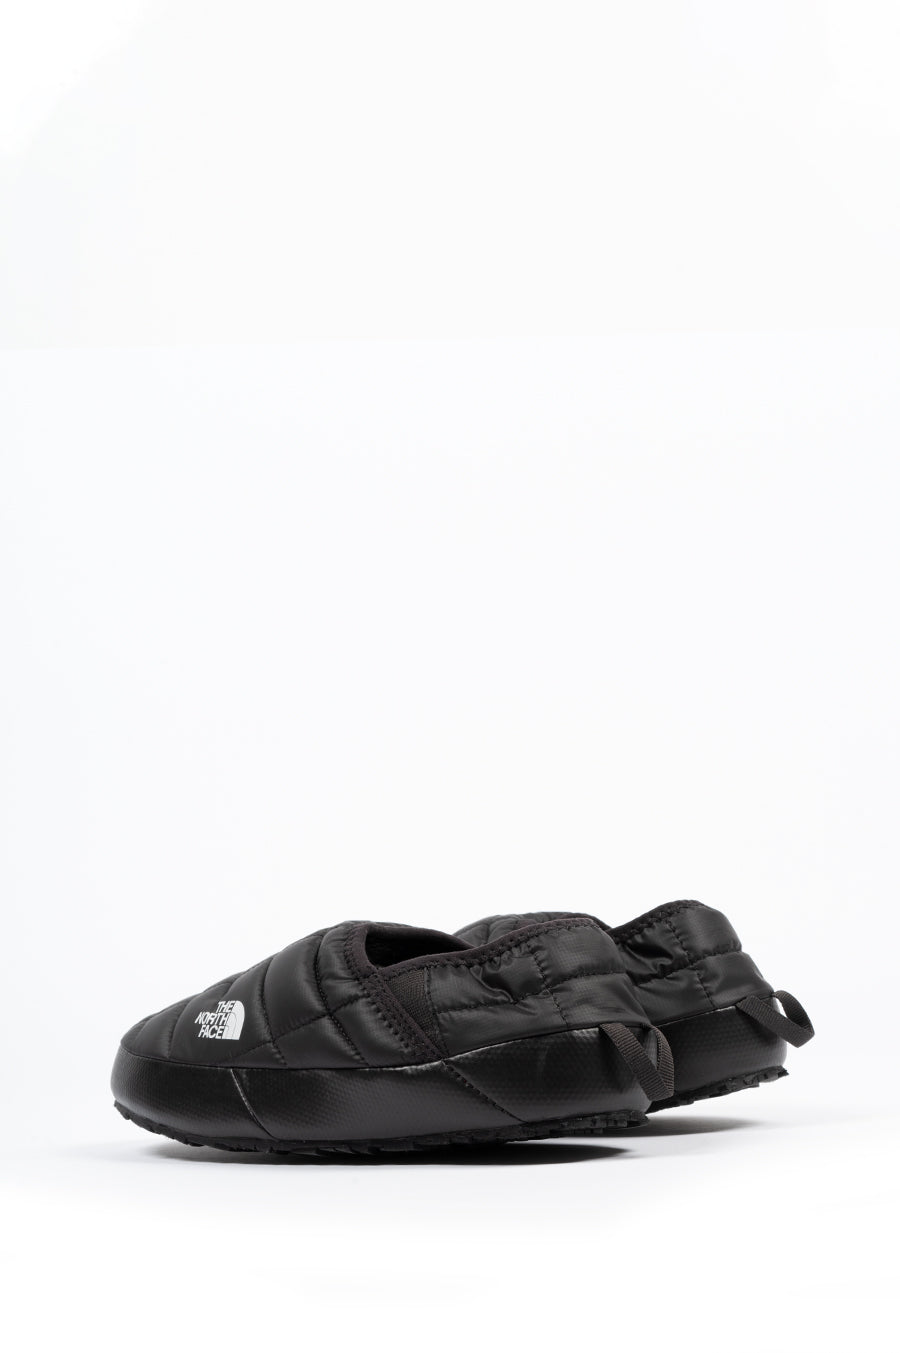 THE NORTH FACE THERMOBALL TRACTION MULE BLACK